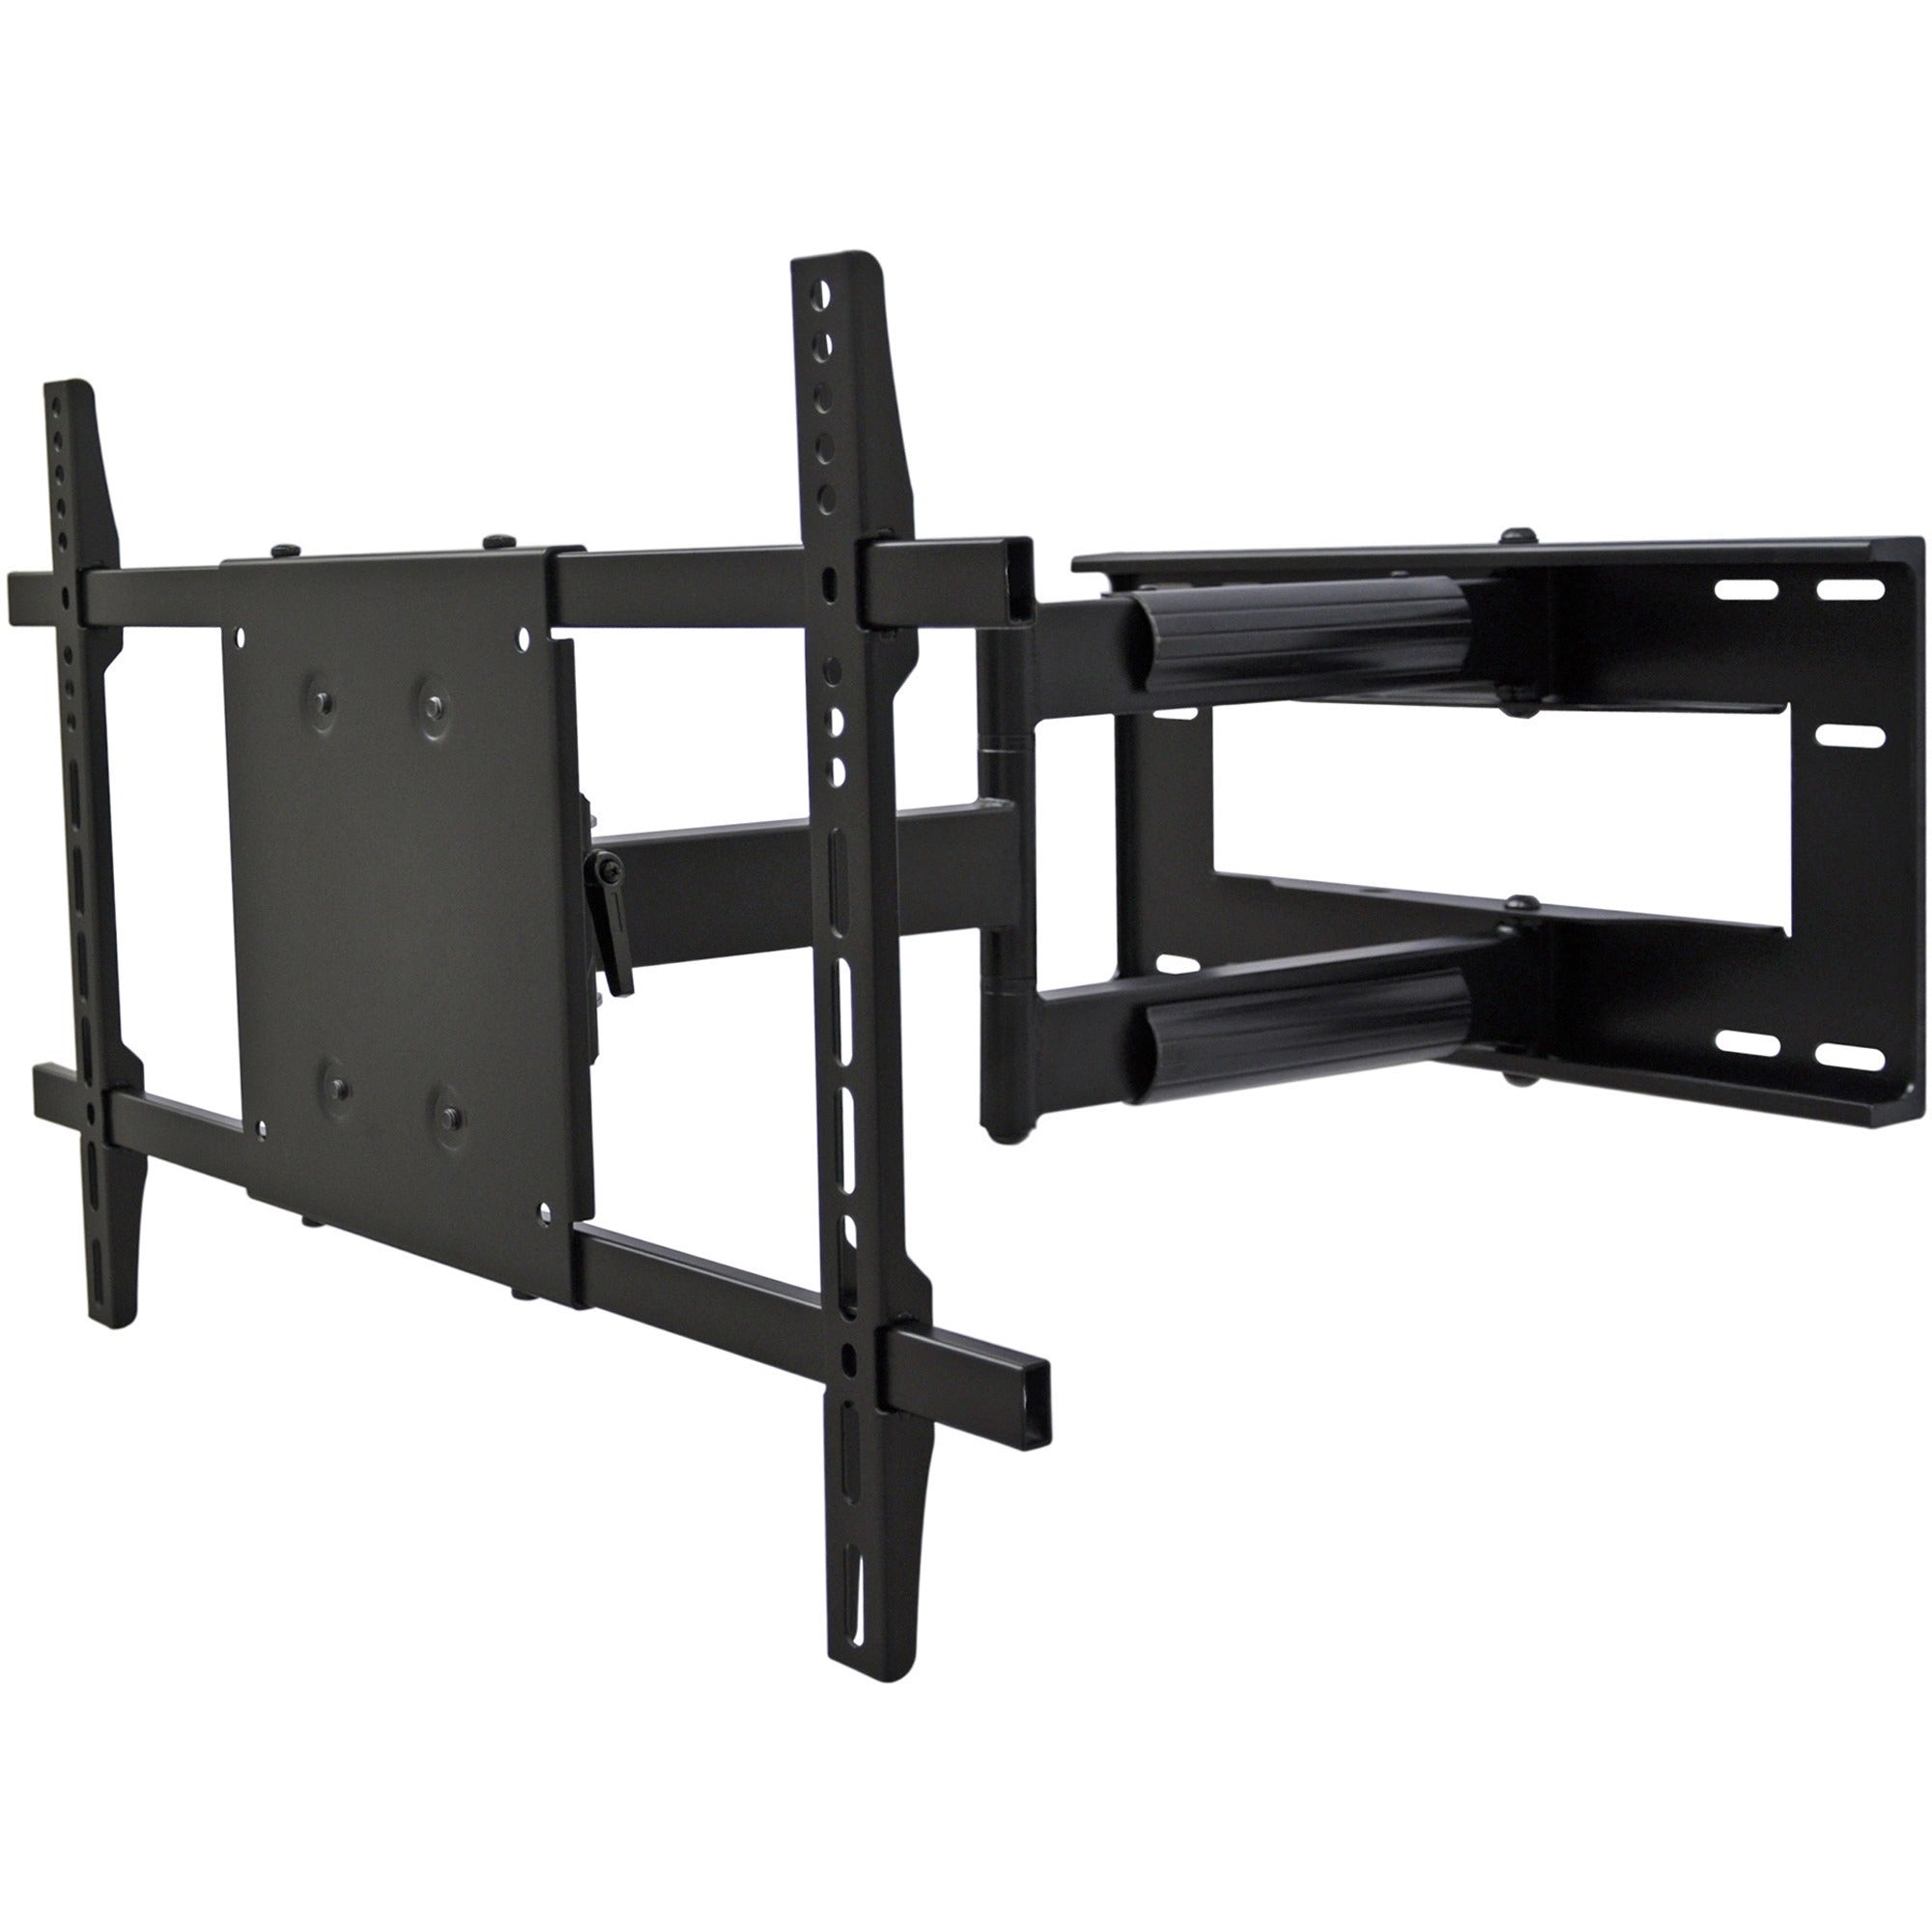 rocelco-vlda-mounting-bracket-for-tv-flat-panel-display-black-2-displays-supported-37-to-70-screen-support-150-lb-load-capacity-200-x-200-600-x-400-100-x-100-400-x-200-300-x-300-400-x-400-vesa-mount-compatible-1-each_rclrvlda - 2